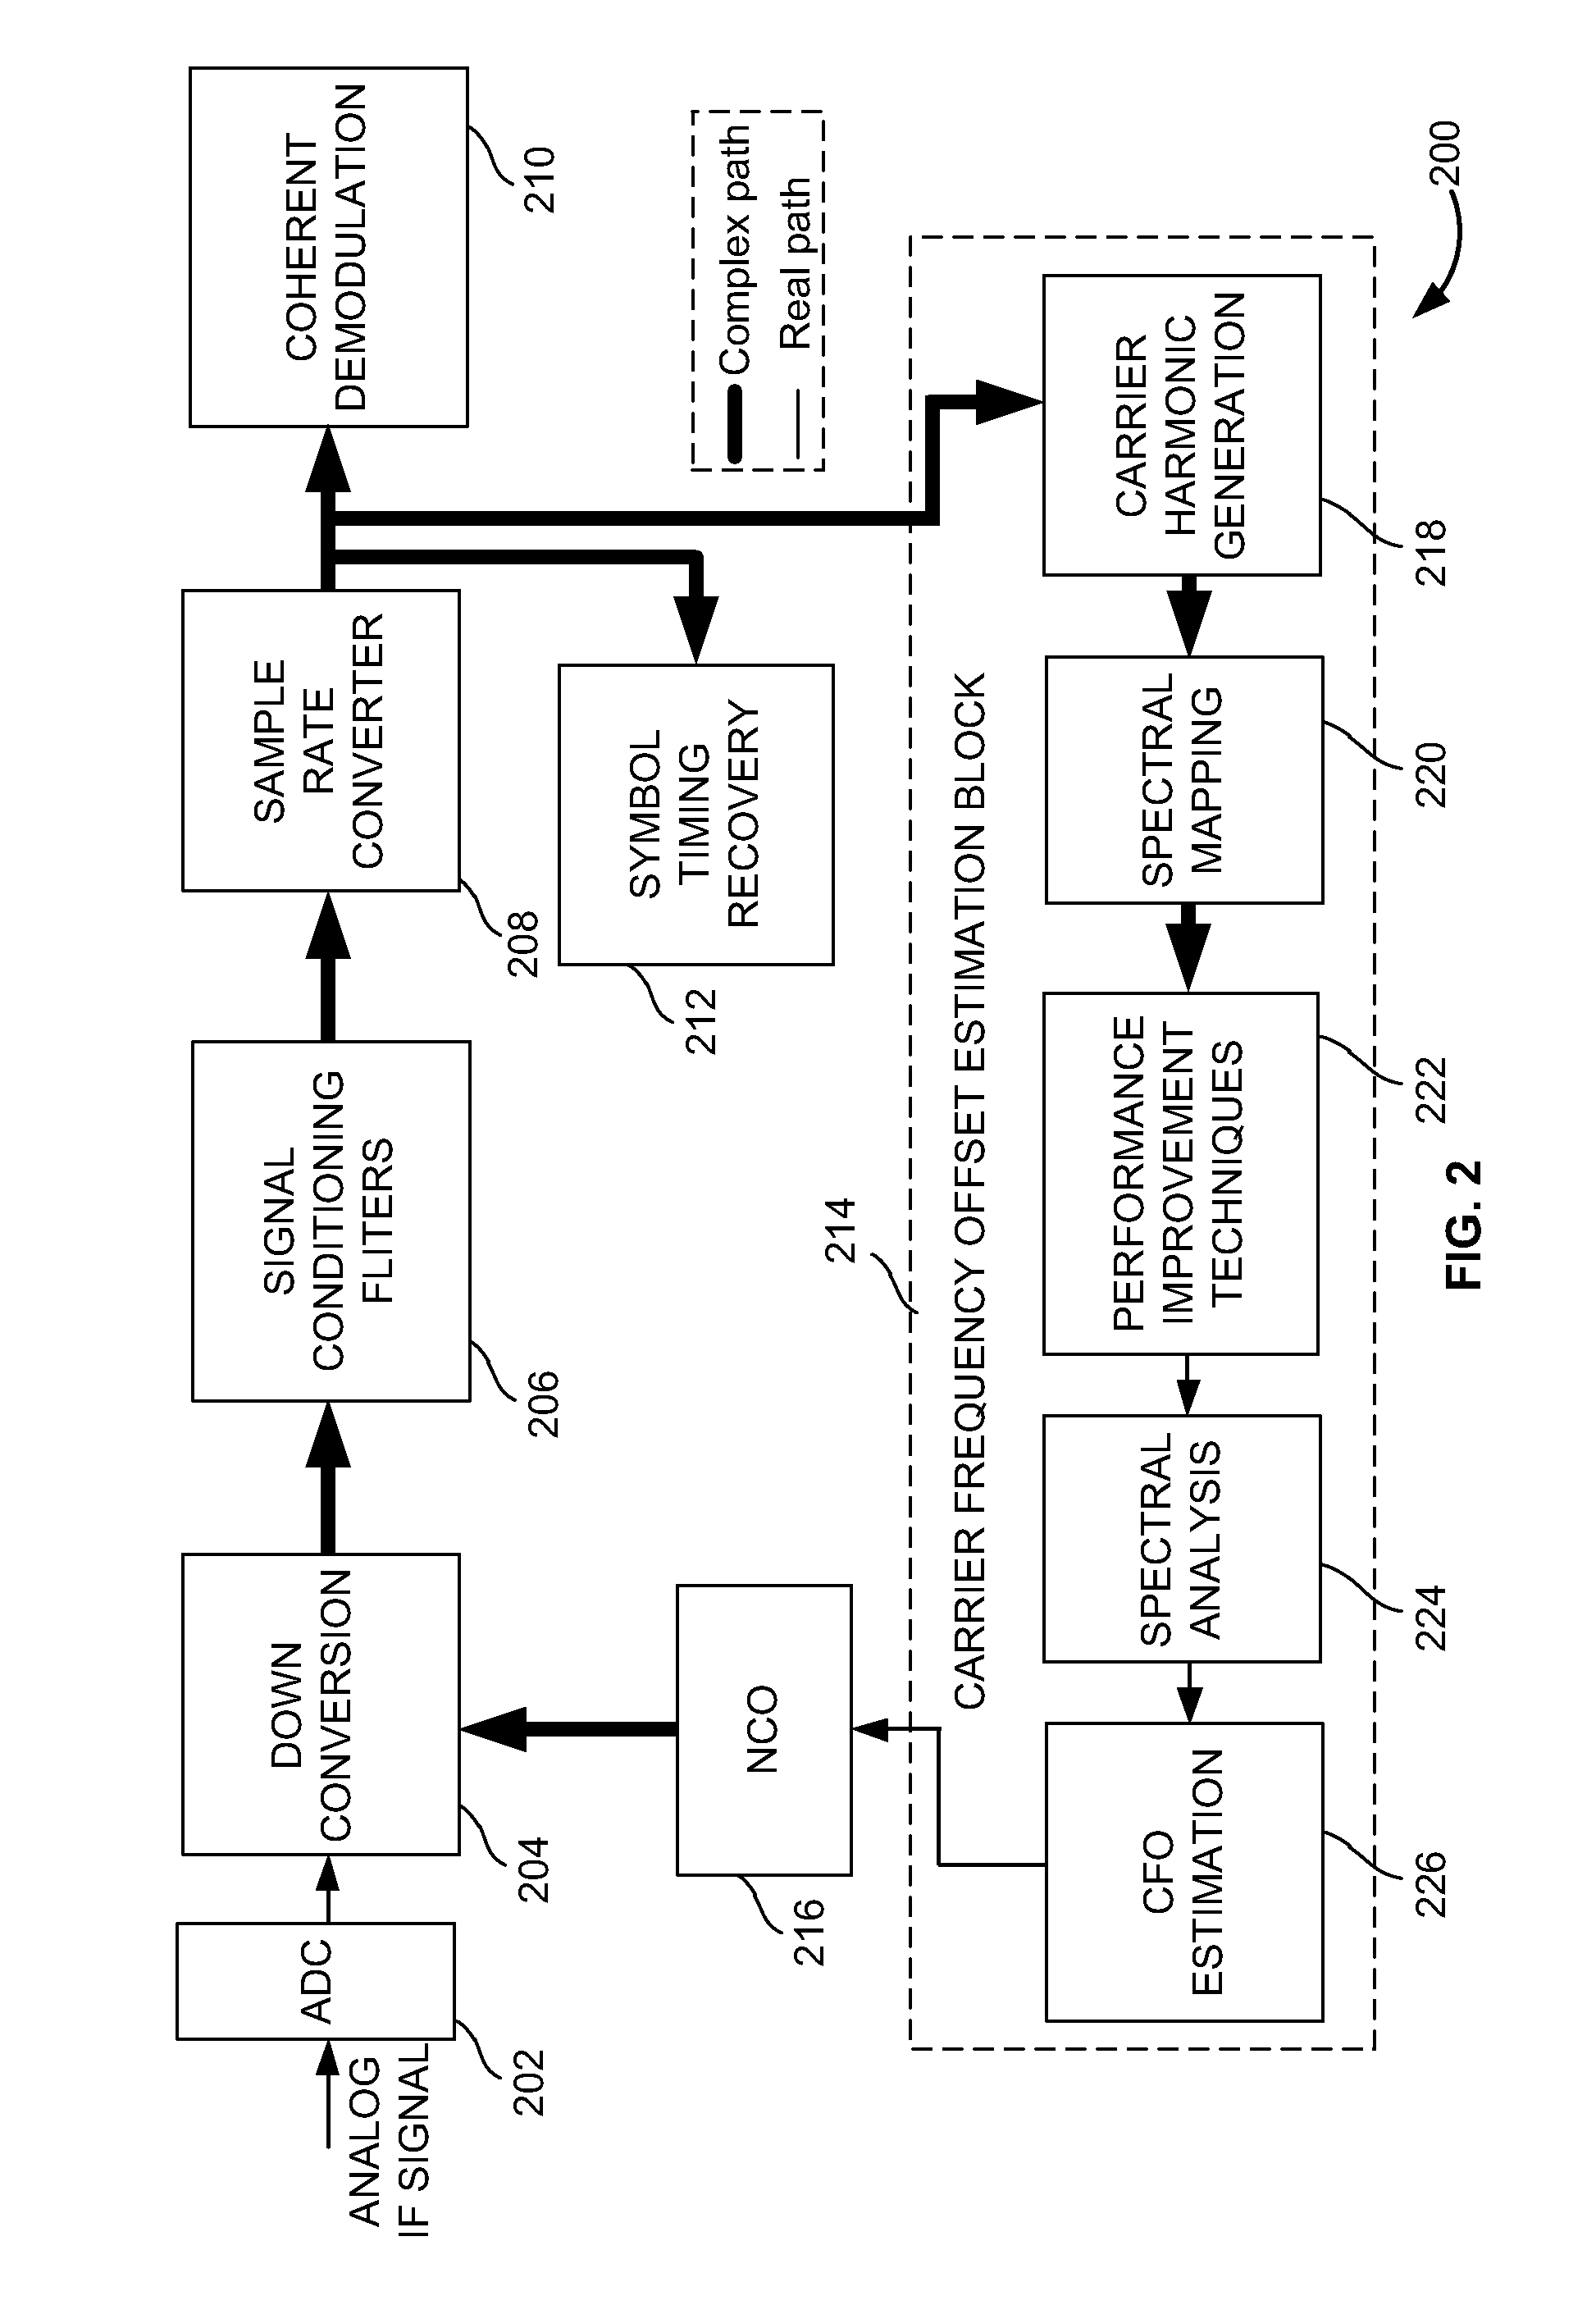 Carrier frequency offset estimation scheme, for digital standards with MPSK modulated preamble